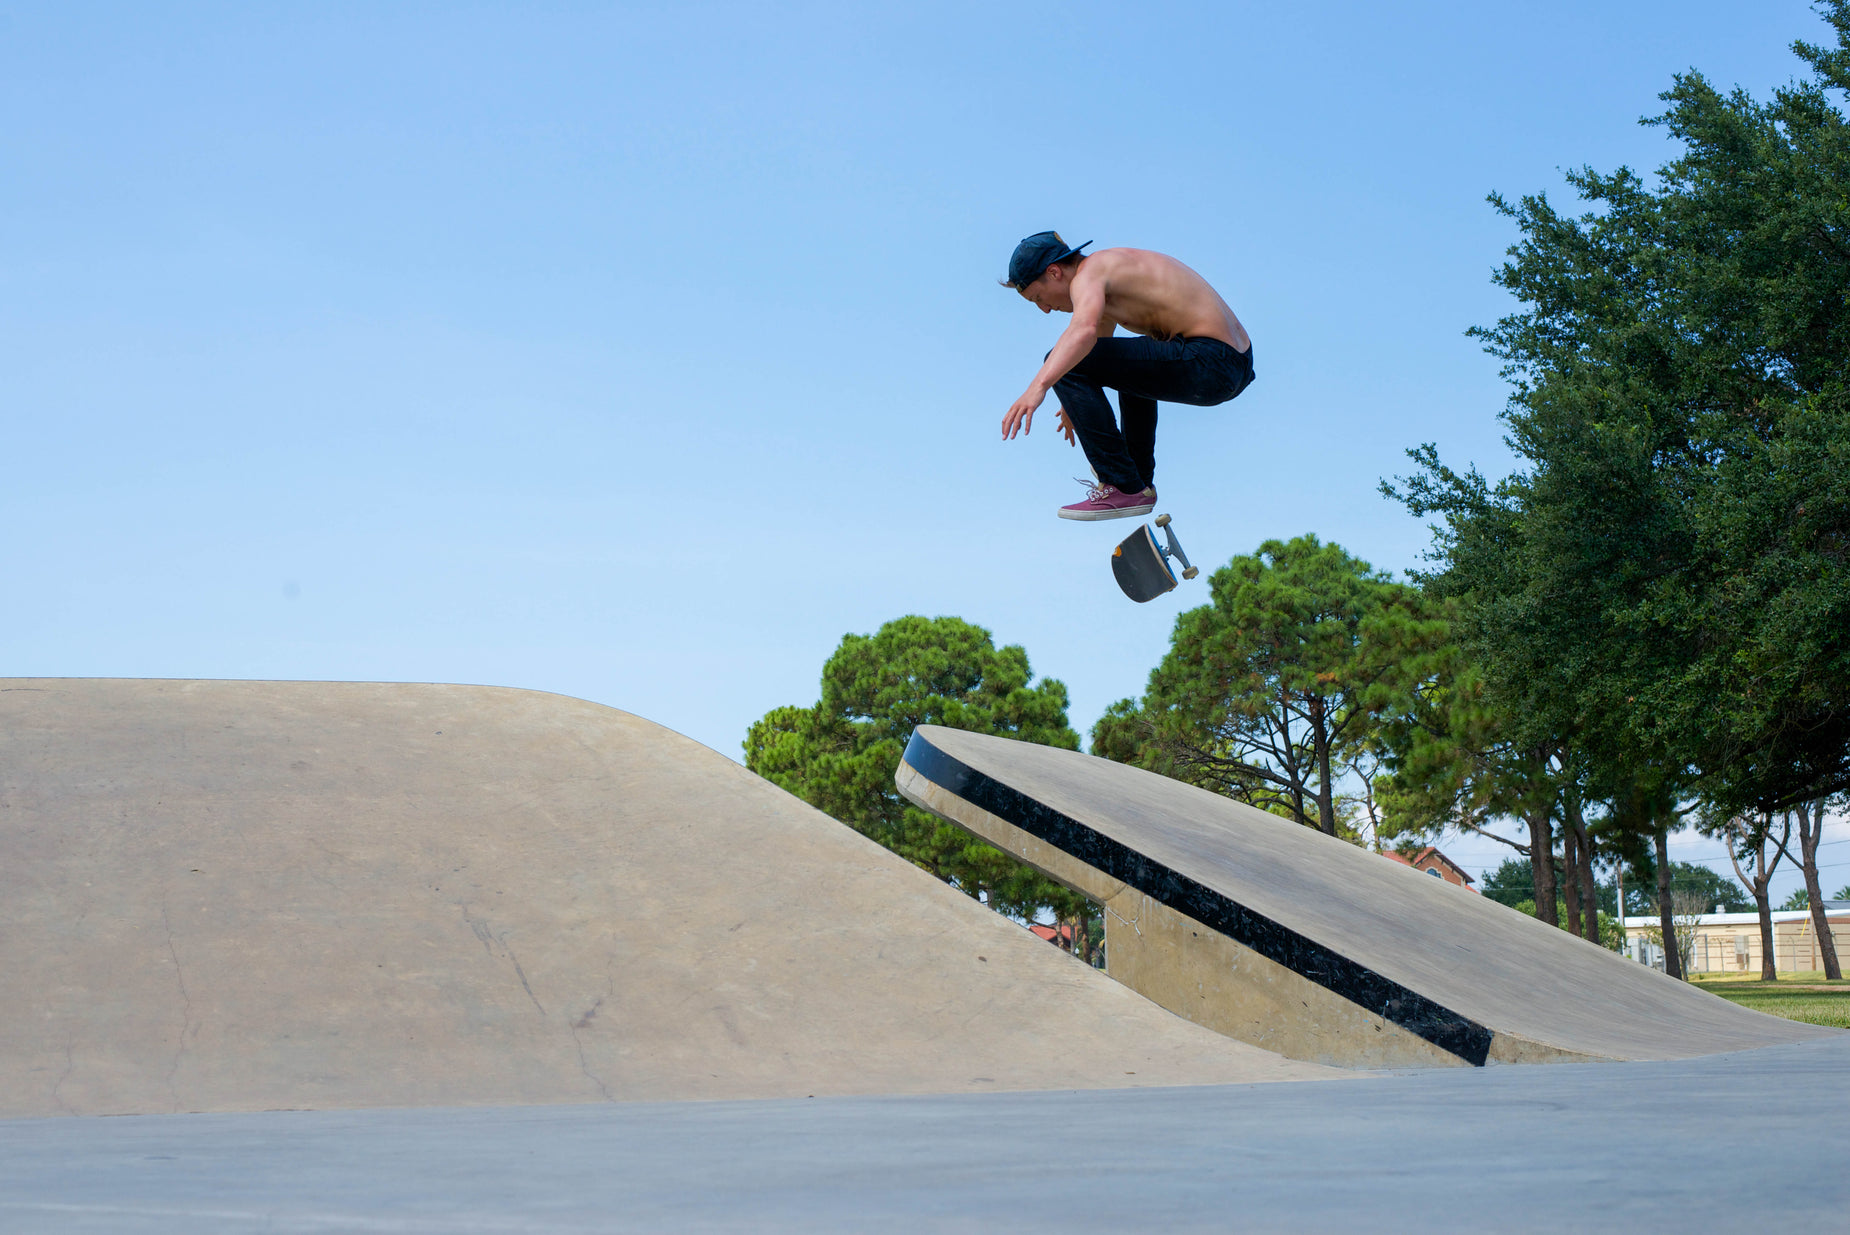 a man is jumping in the air while skateboarding